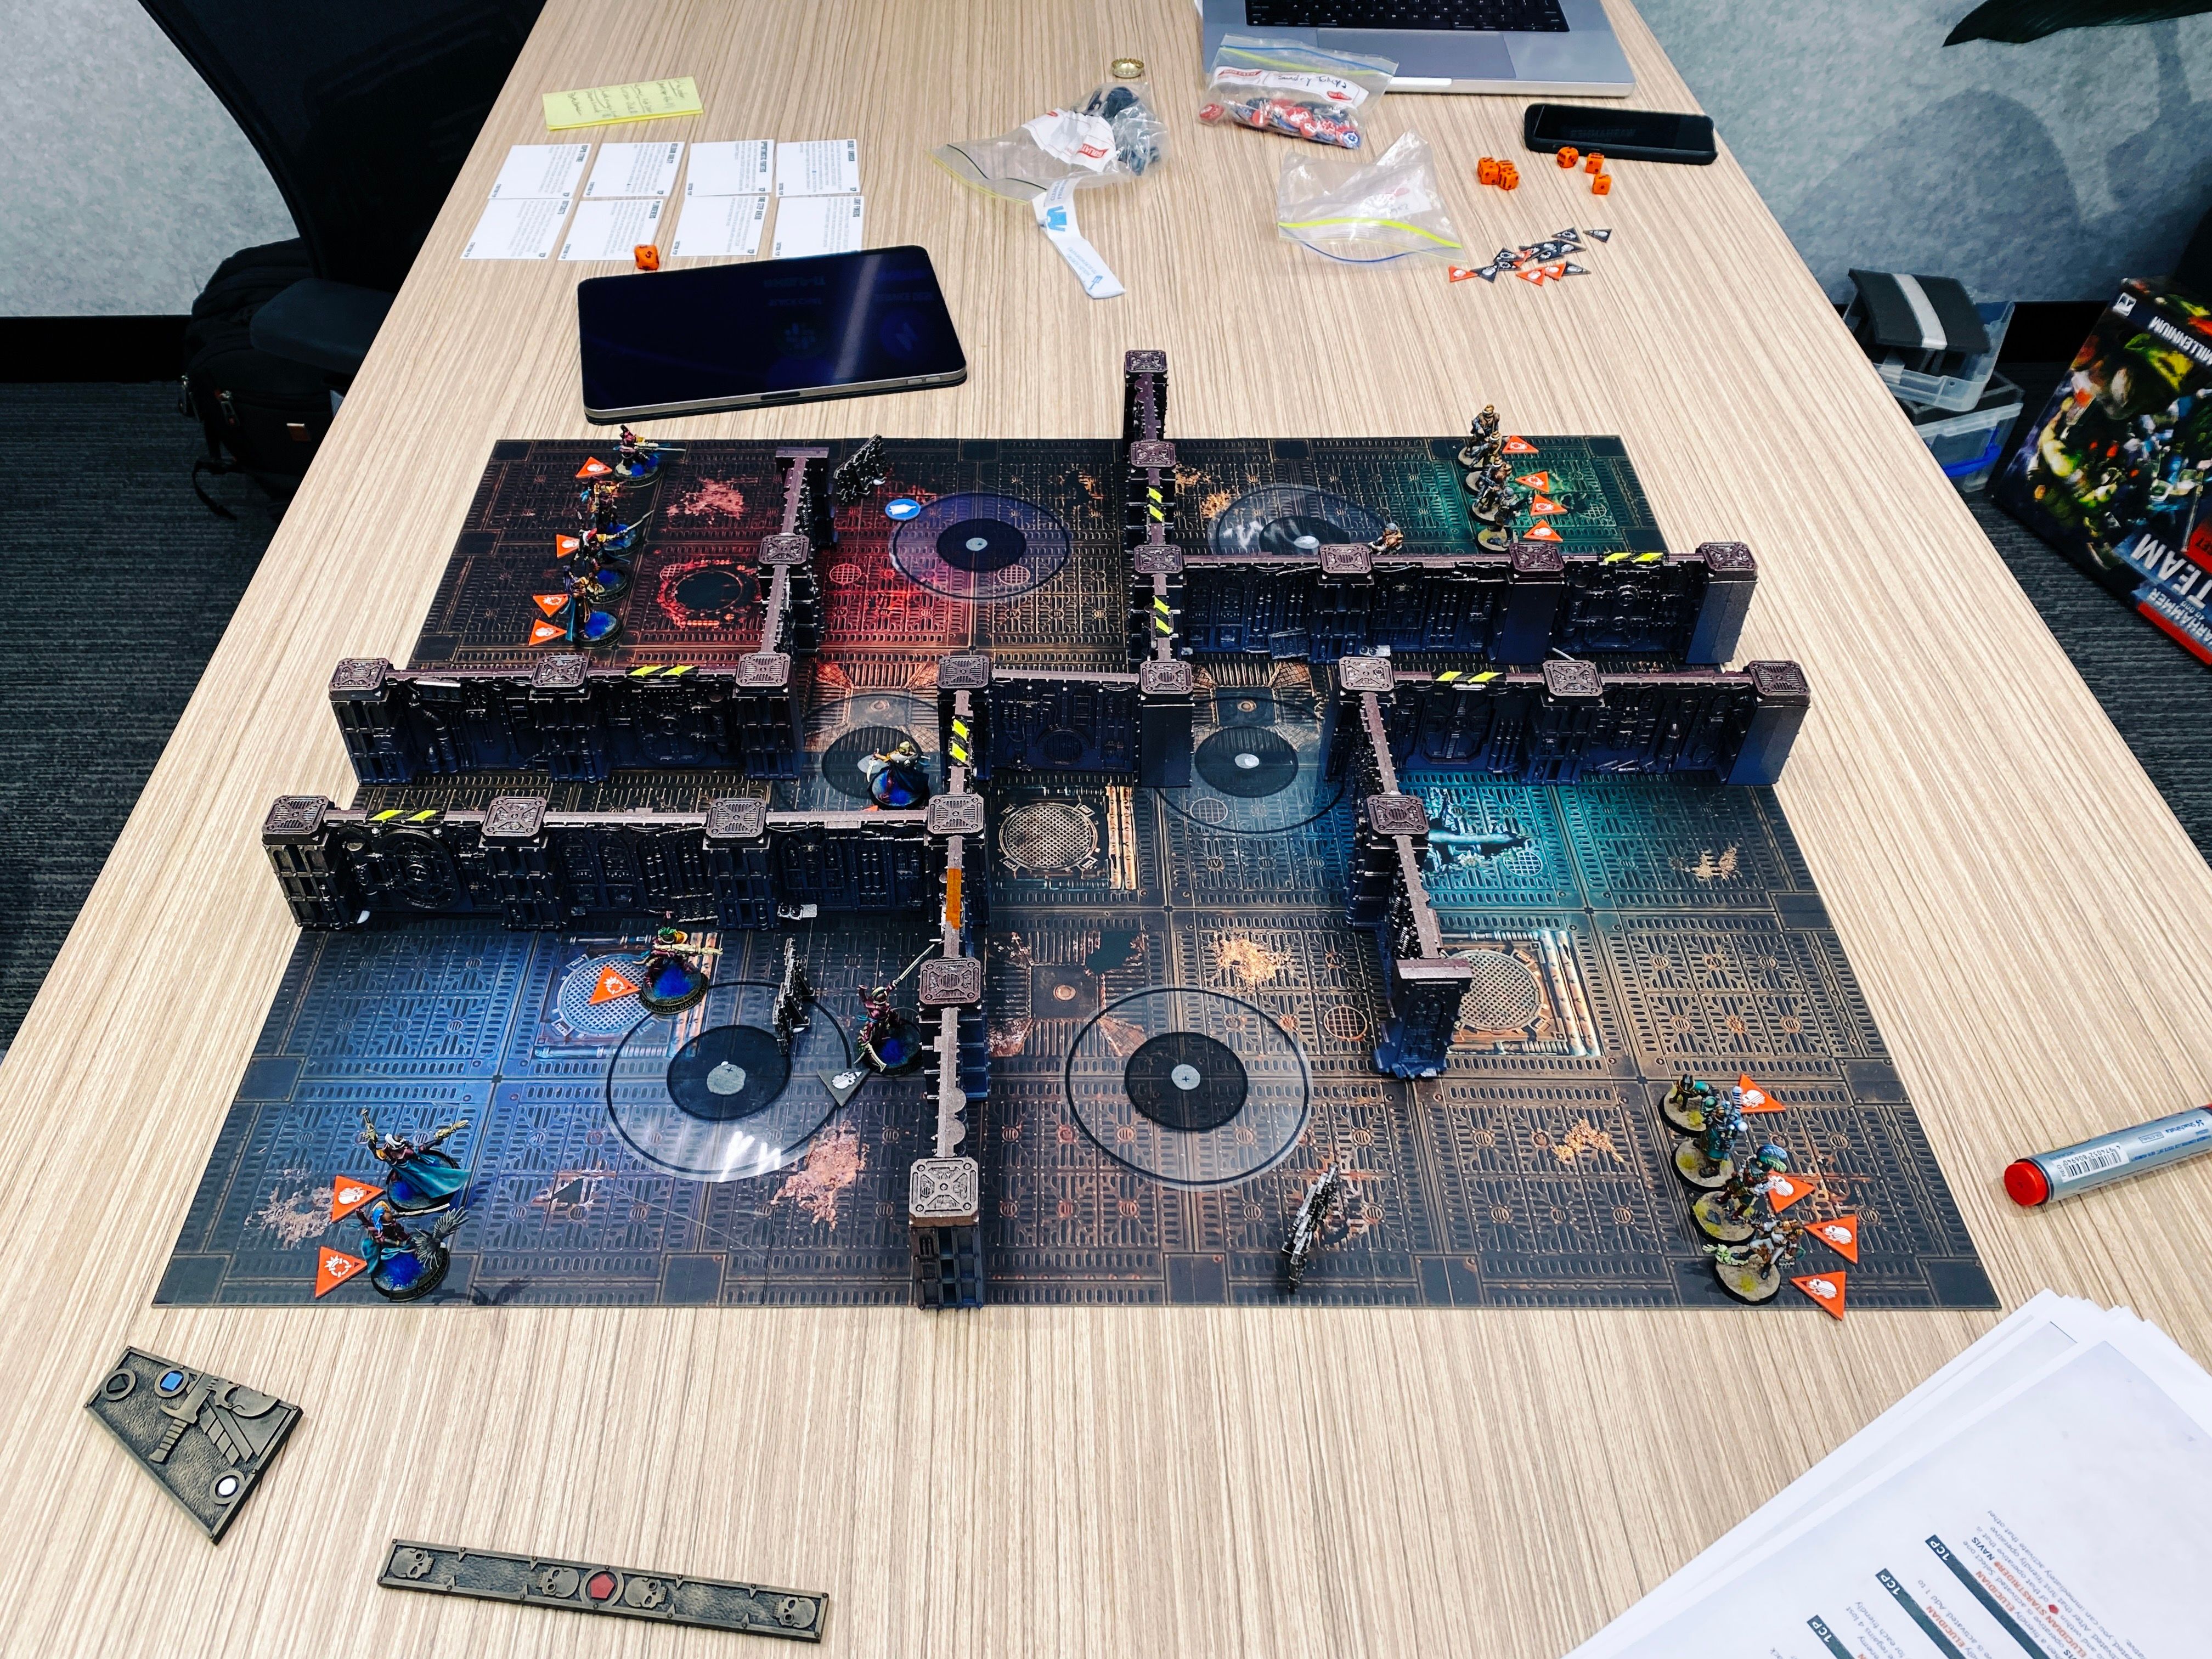 A photo of a game of Warhammer 40,000: Kill Team. The board looks like the metal of the inside of an ancient steampunk starship, and the terrain is a bunch of walls all connected together in the same steampunk style to form number of interconnecting rooms. On the left are my forces, the Aeldari (think space elves) in elegant fuchsia-coloured armour, and facing them on the other side of the board are the Elucidian Starstriders, a motley assortment of lightly armoured humans.